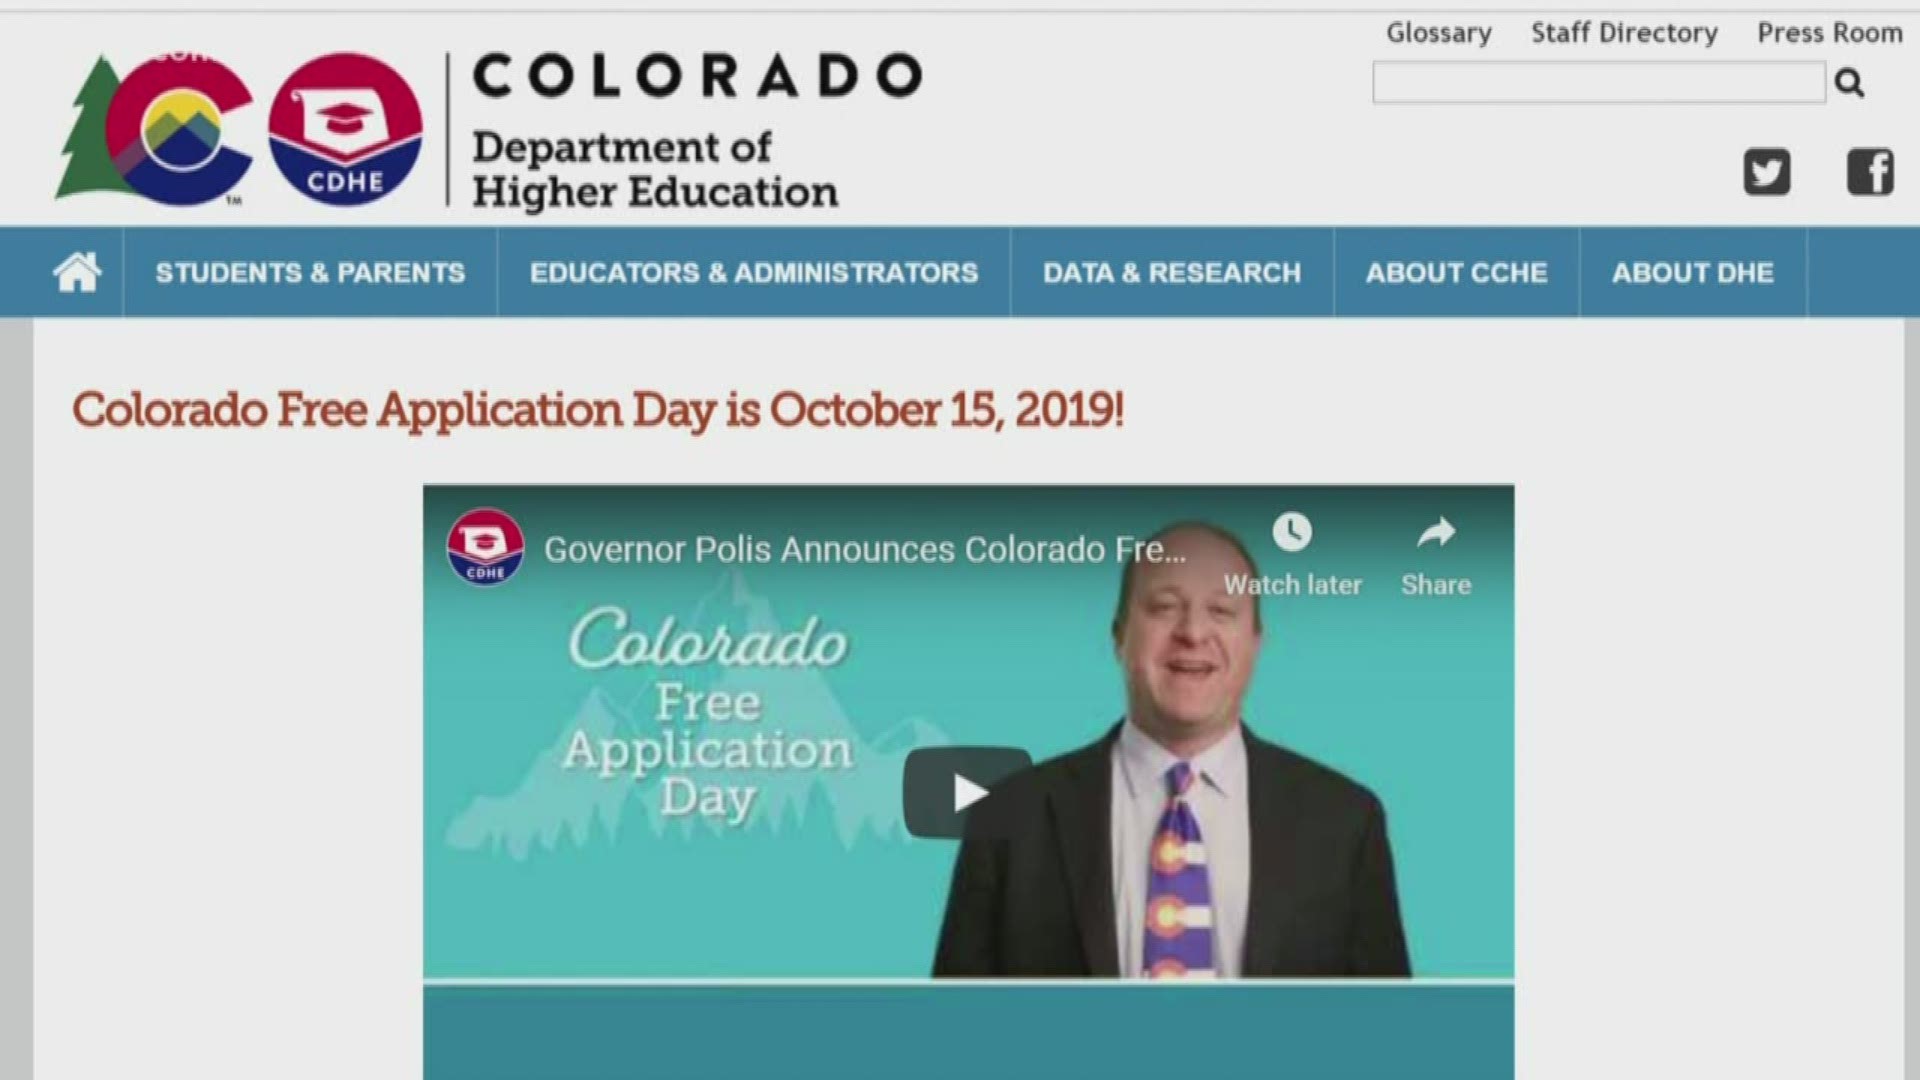 Colorado Free Application Day is Tuesday, Oct. 15, 2019.